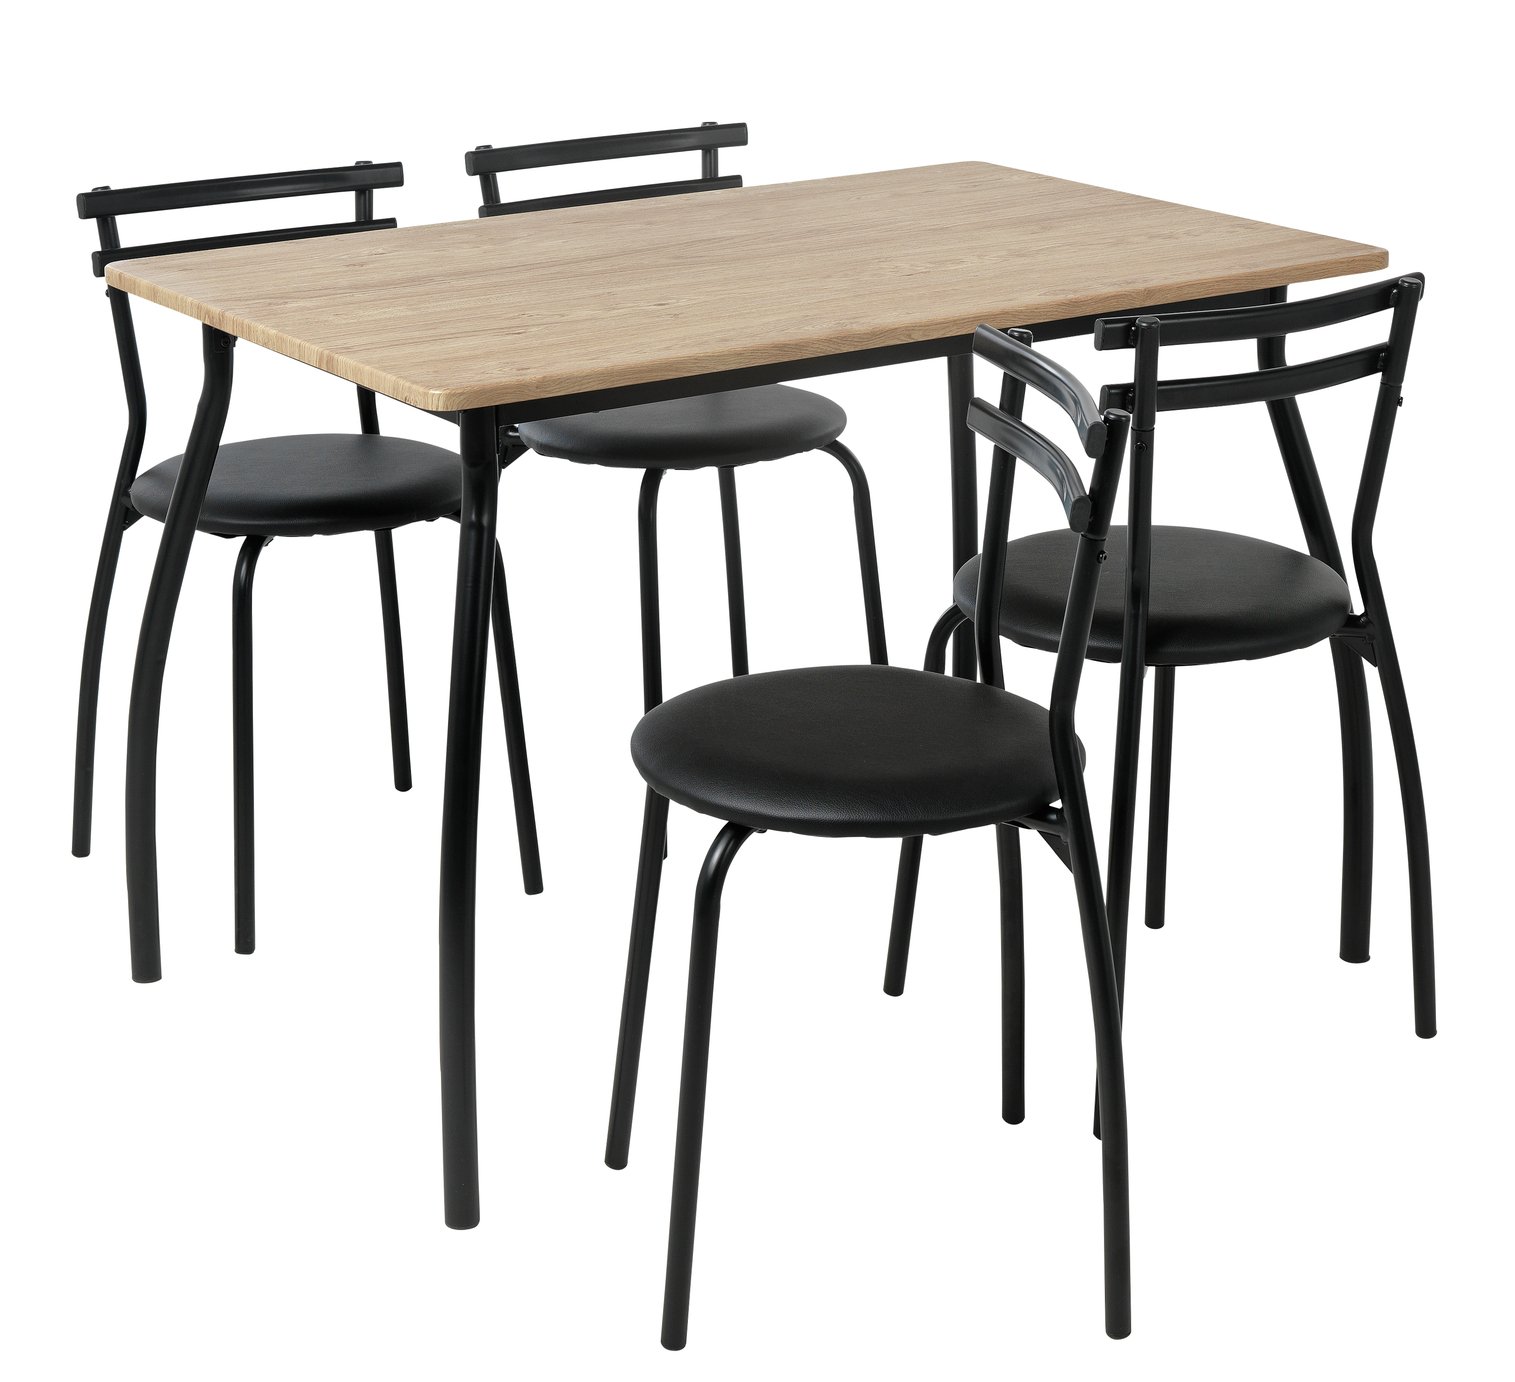 Argos Home Leon Oak Effect Dining Table & 4 Grey Chairs